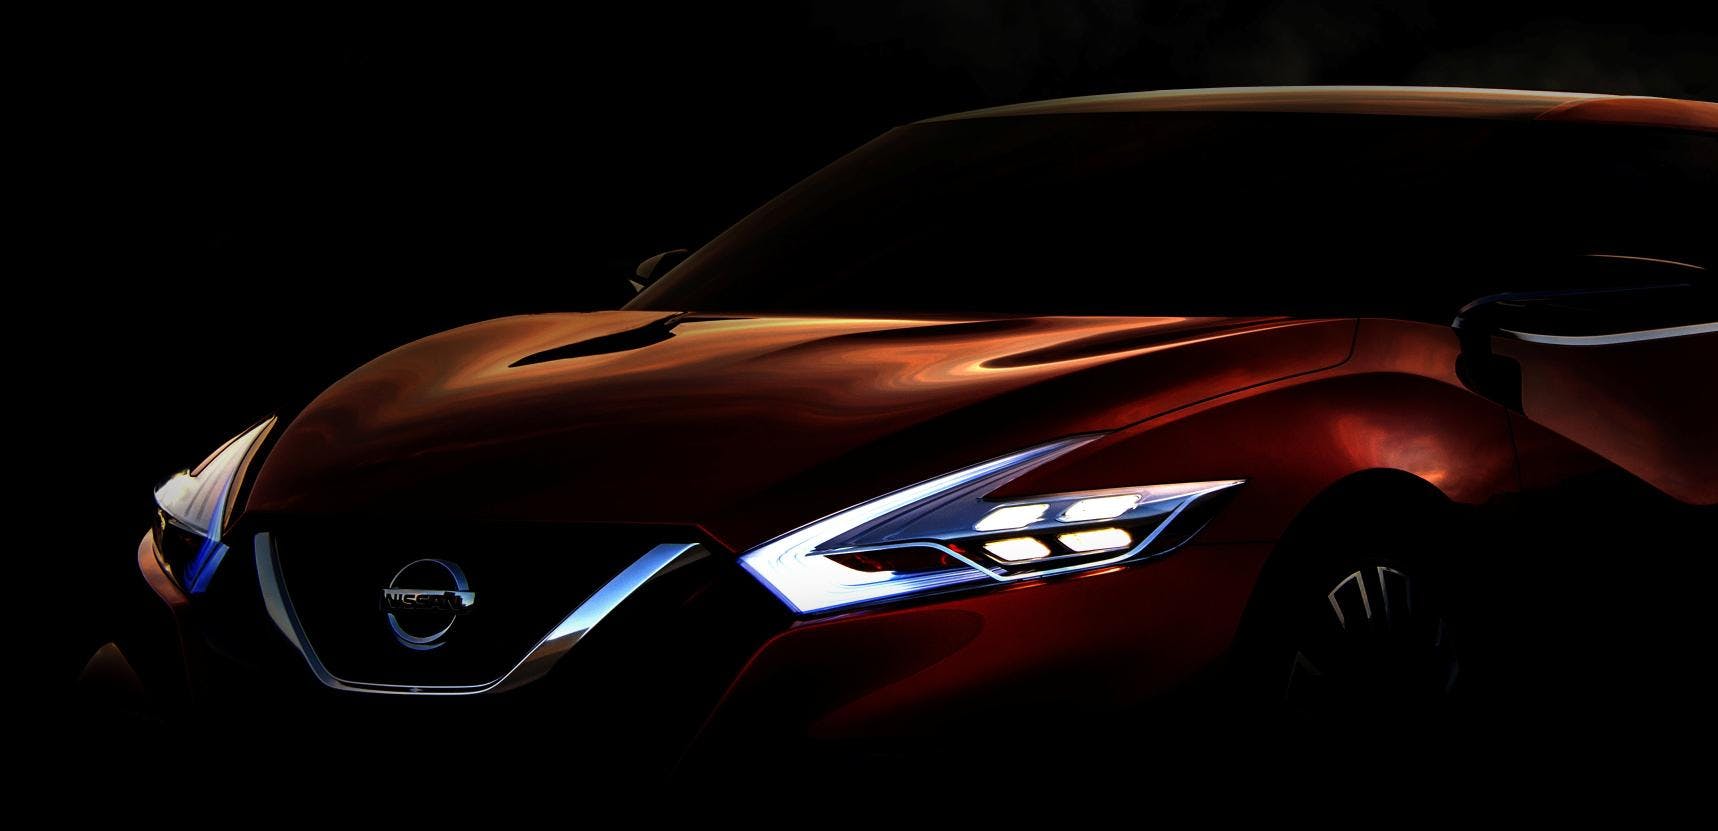 Nissan to Debut New Sports Sedan Concept at 2014 North American International Auto Show